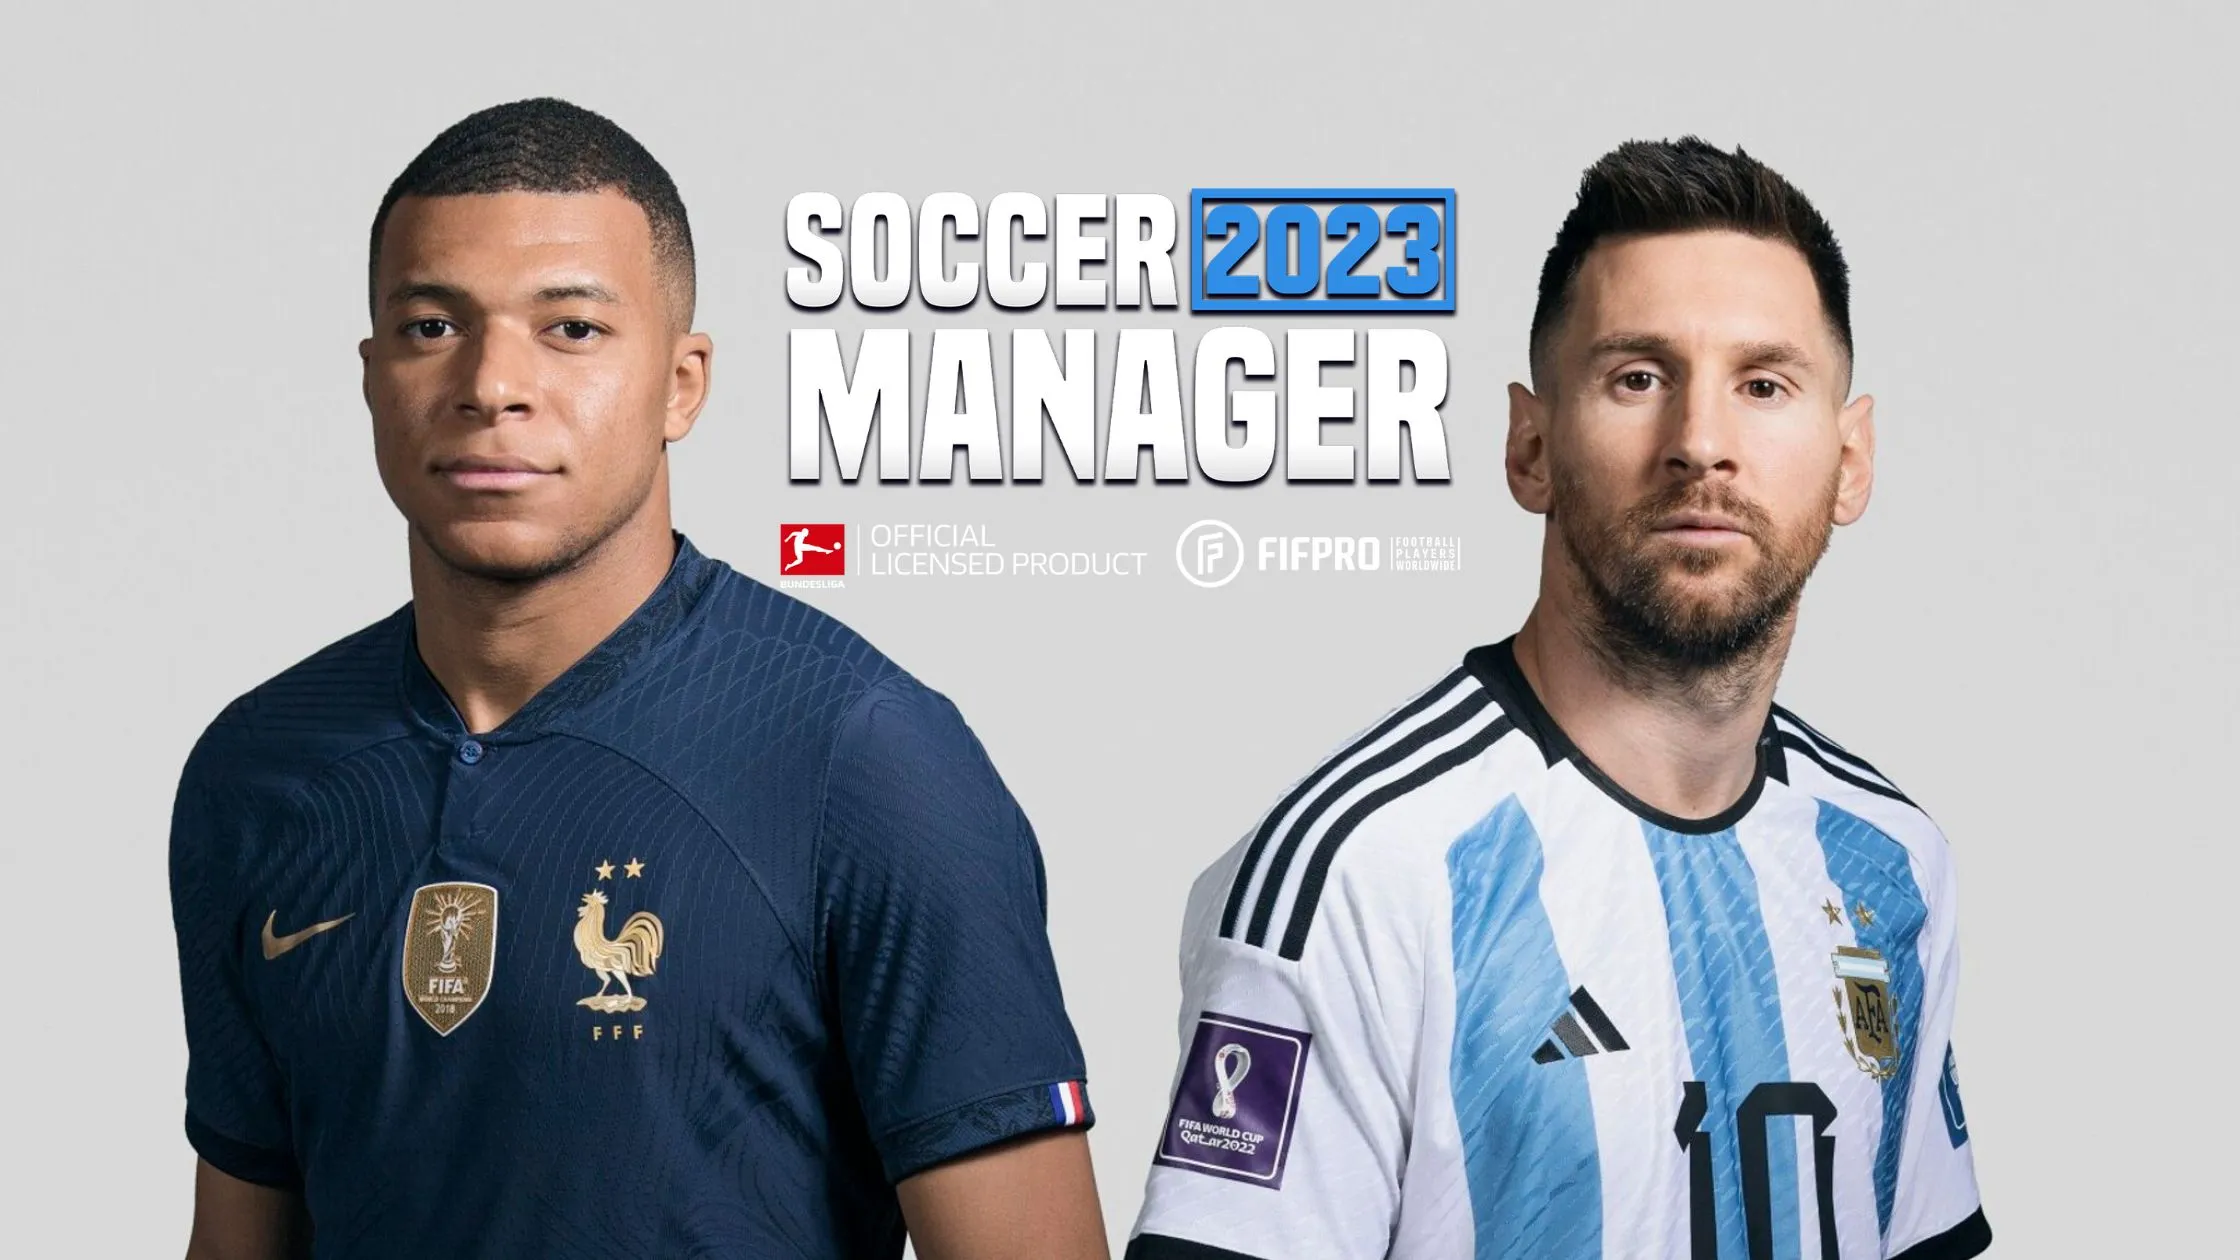 List of the Soccer Manager 2023 best players